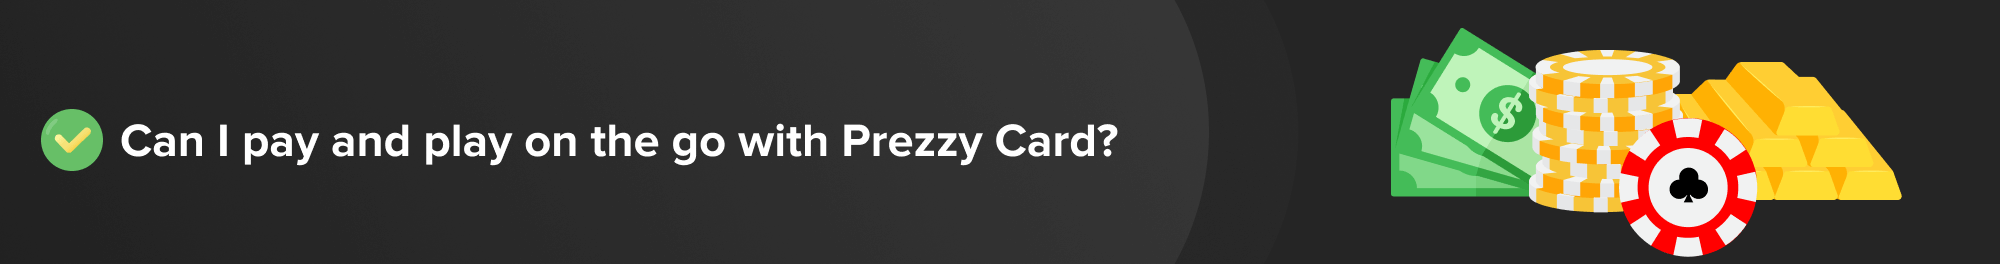 Playing On the Go with Prezzy Card